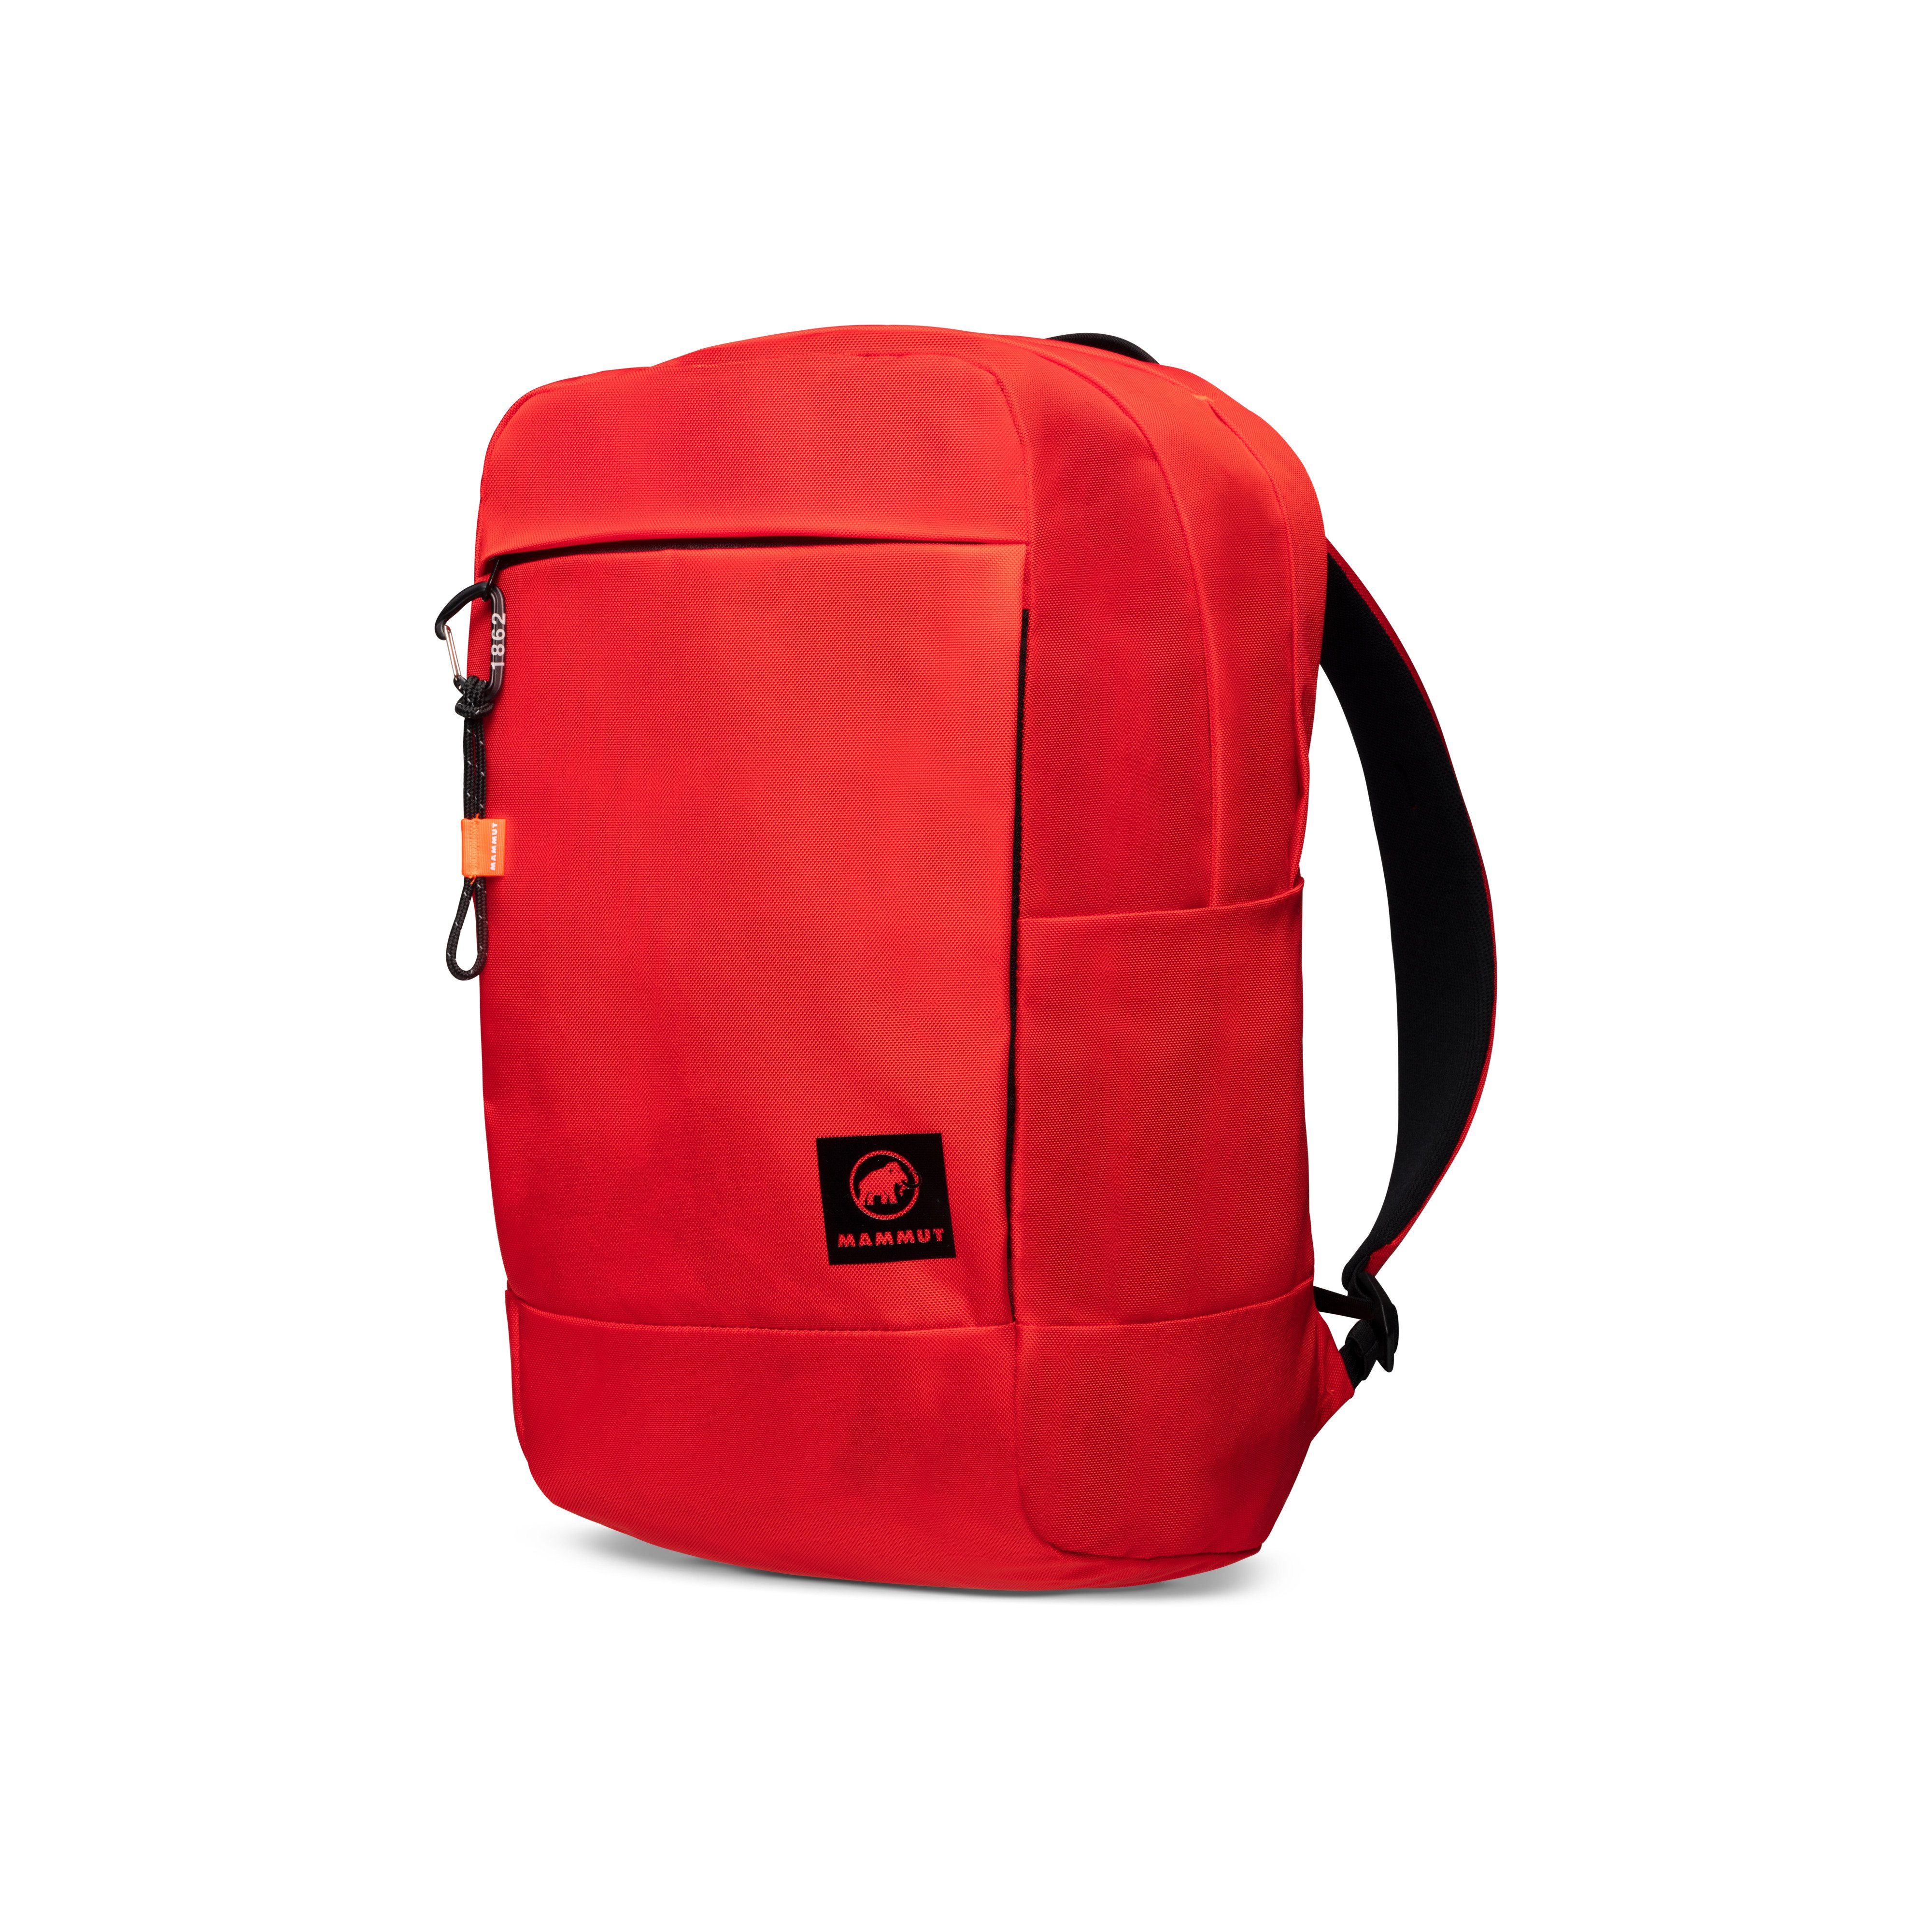 Xeron 25 - spicy, 25 L product image